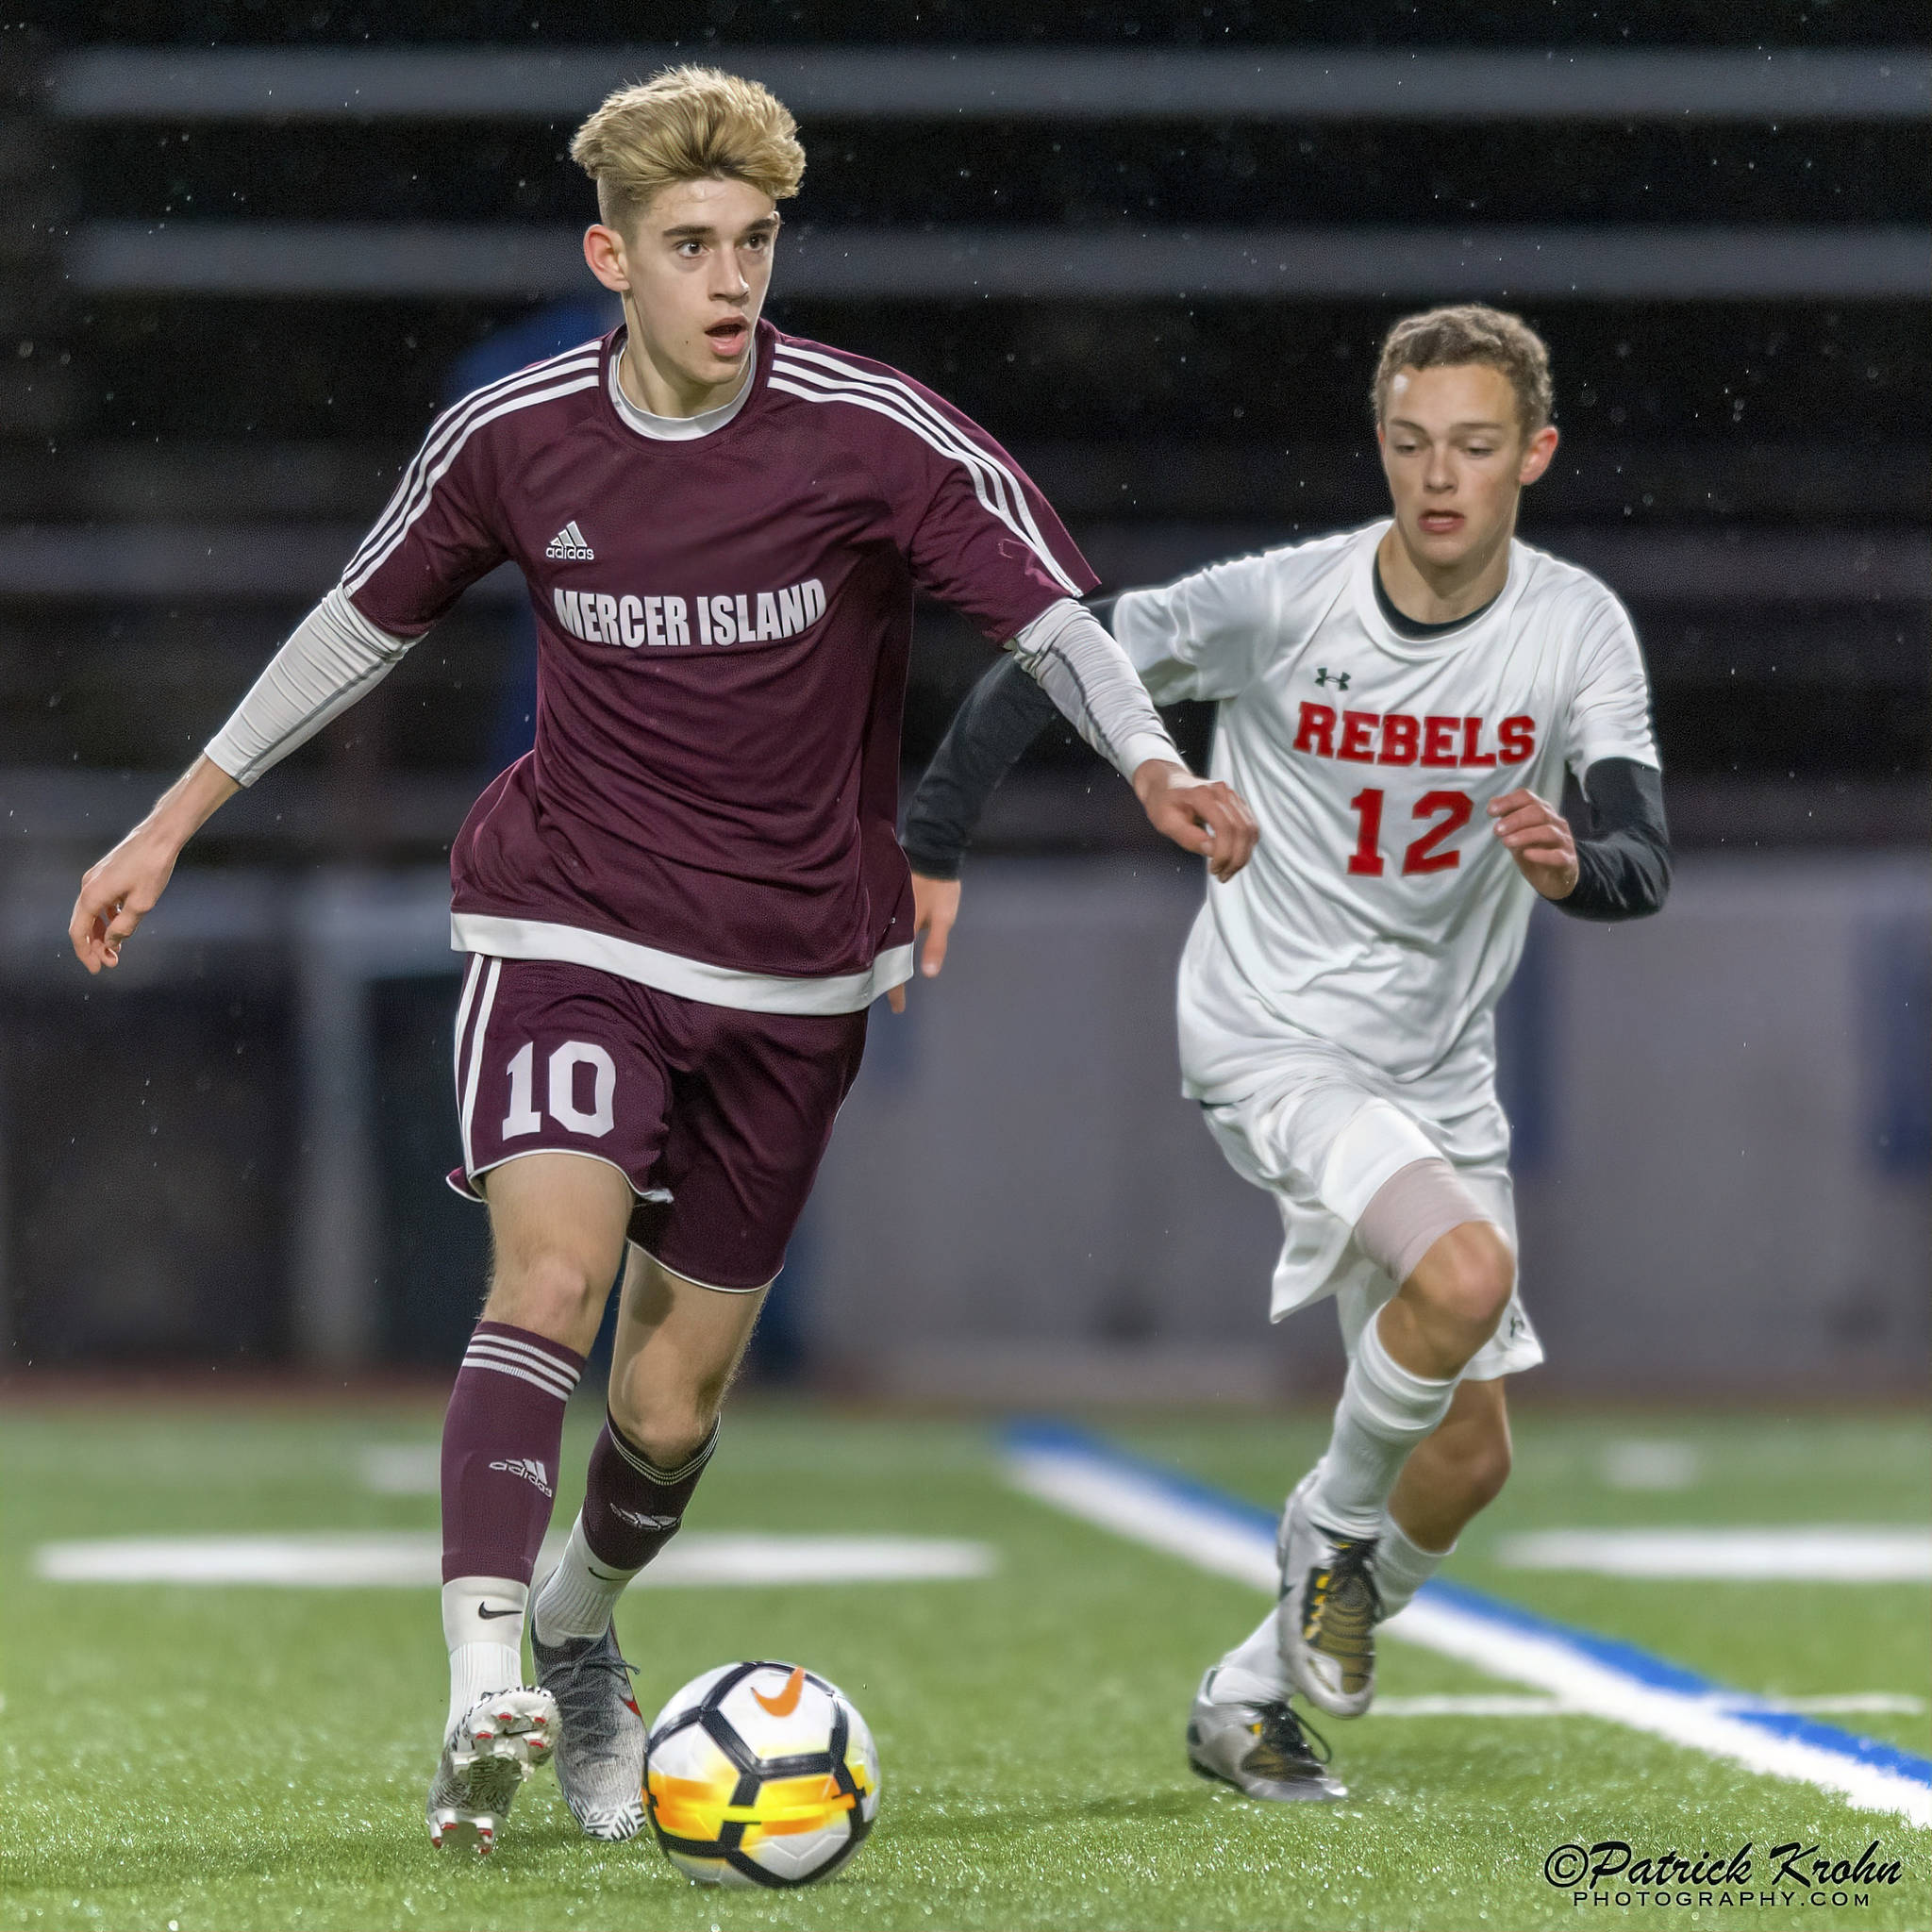 Mercer Island senior Matthew Capone, left, dribbles the ball up field while being guarded by Juanita sophomore Andrew Taylor in a game on April 11. Capone earned first-team all-3A KingCo honors as a midfielder during the 2019 season. Photo courtesy of Patrick Krohn/Patrick Krohn Photograph